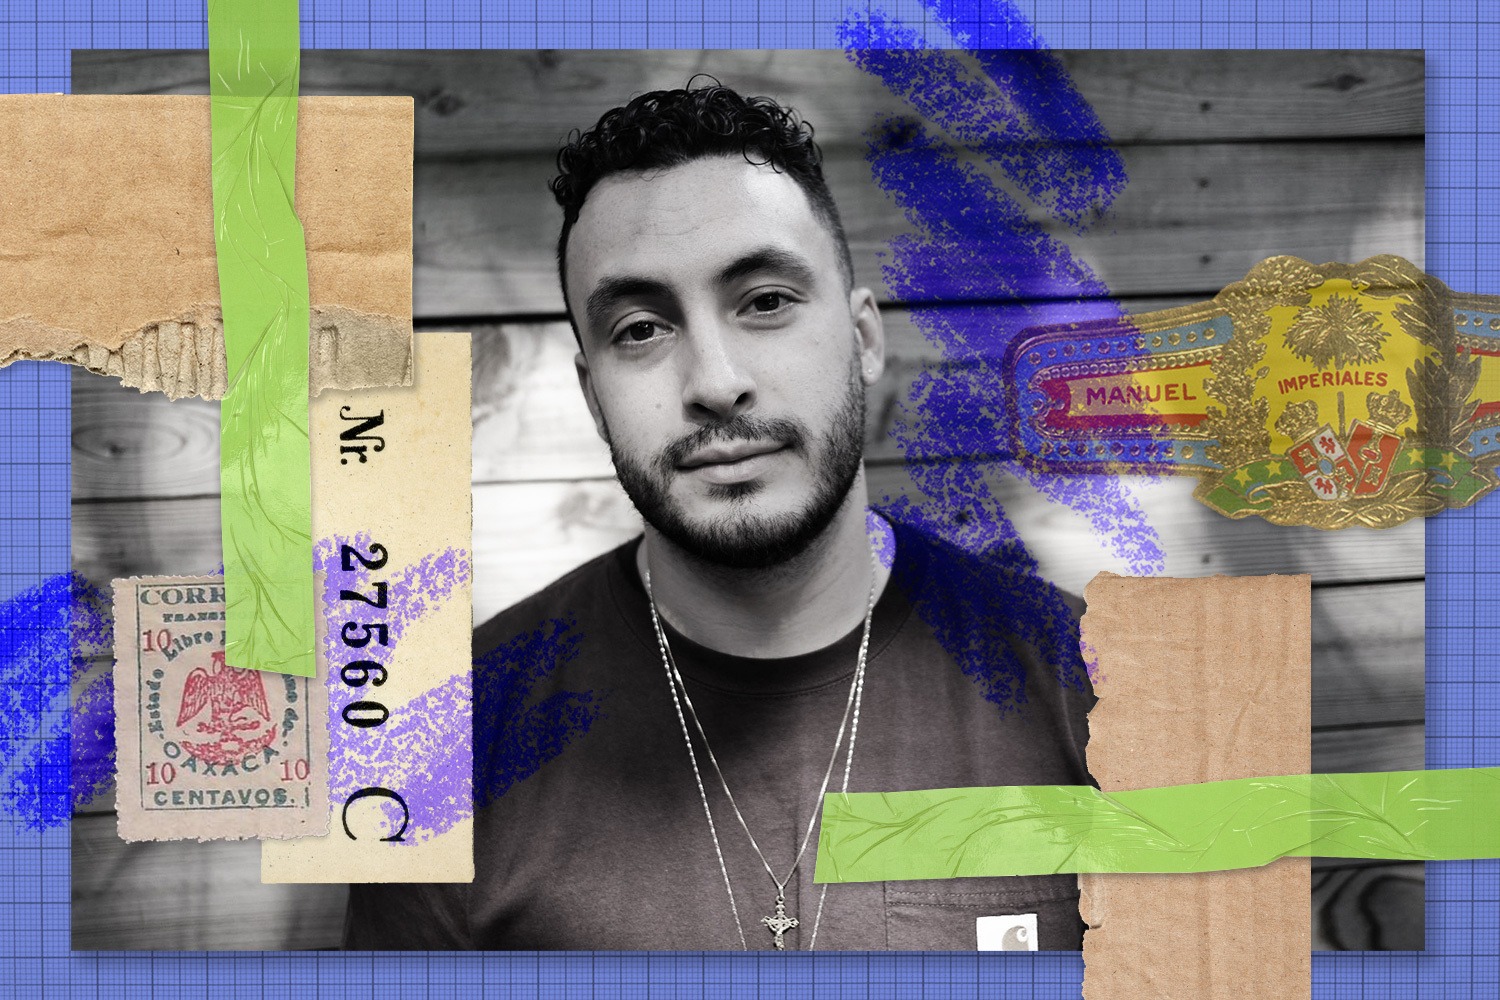 Rewrites collage of José Cardenas, black and white portrait with cardboard scraps, green tape, purple scribbles, ticket and stamps, and Manuel Lopez Imperiales wrapper of cigar. August 2021